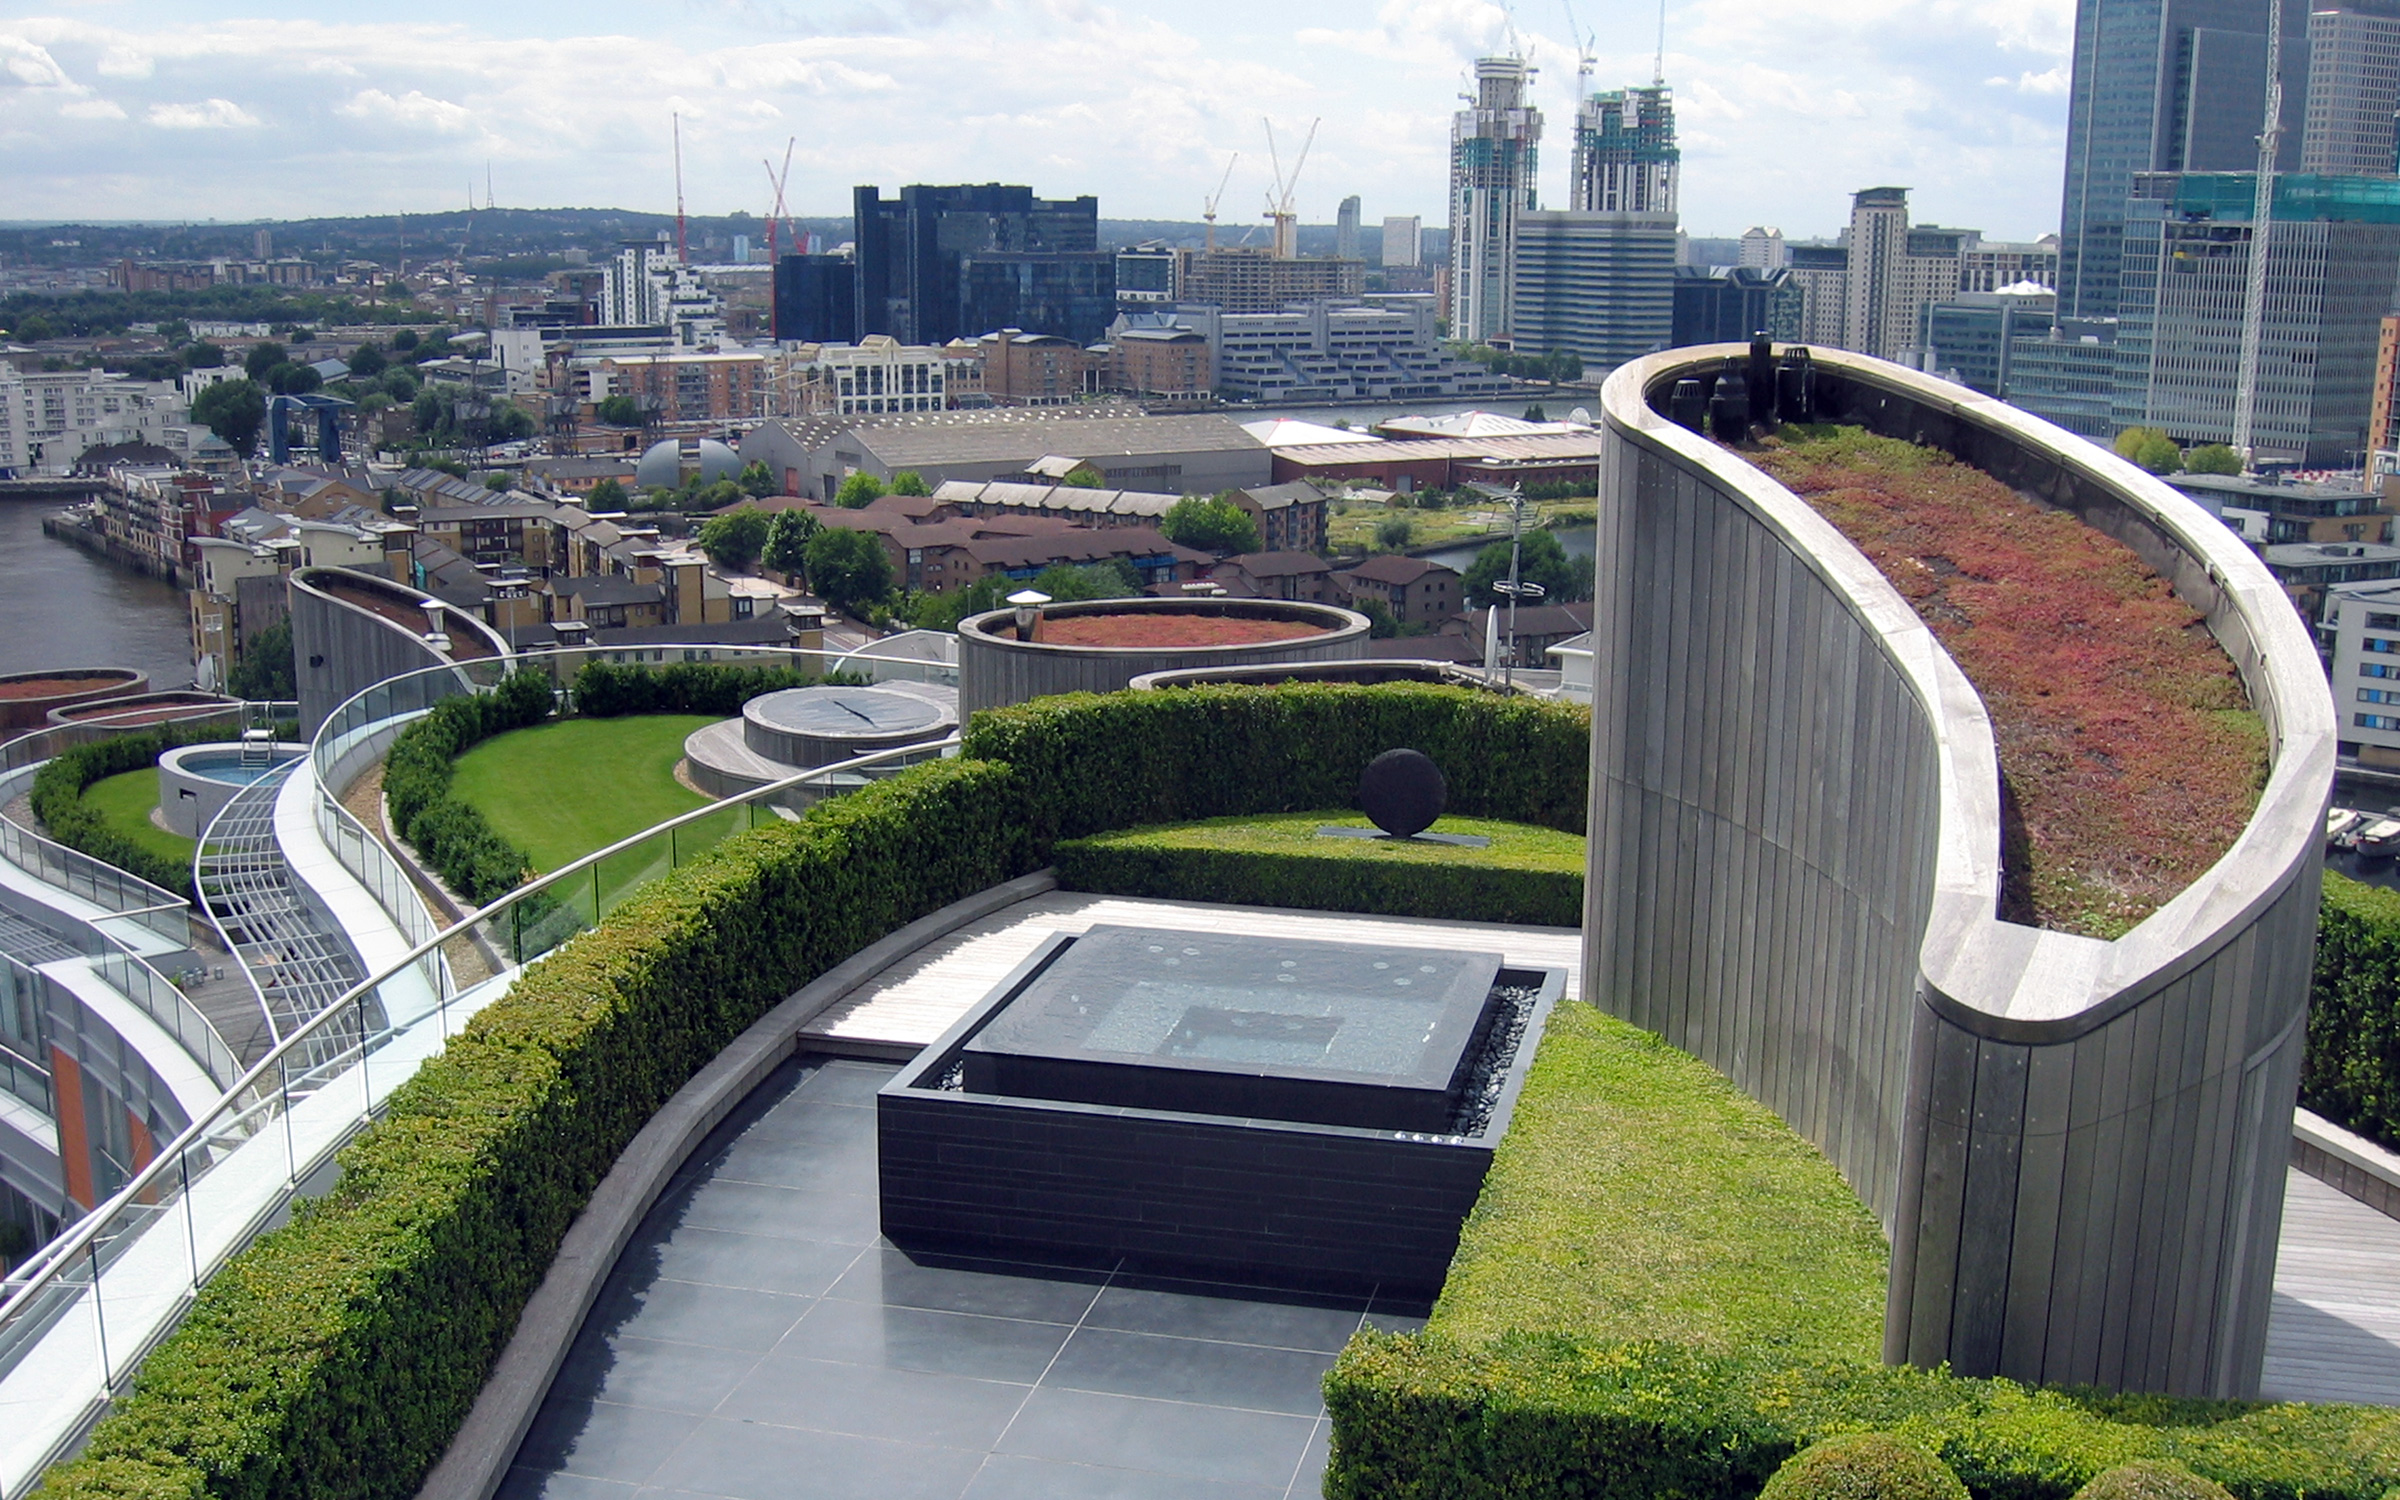 Roof garden with hedge and roof deck vegetated with Sedum